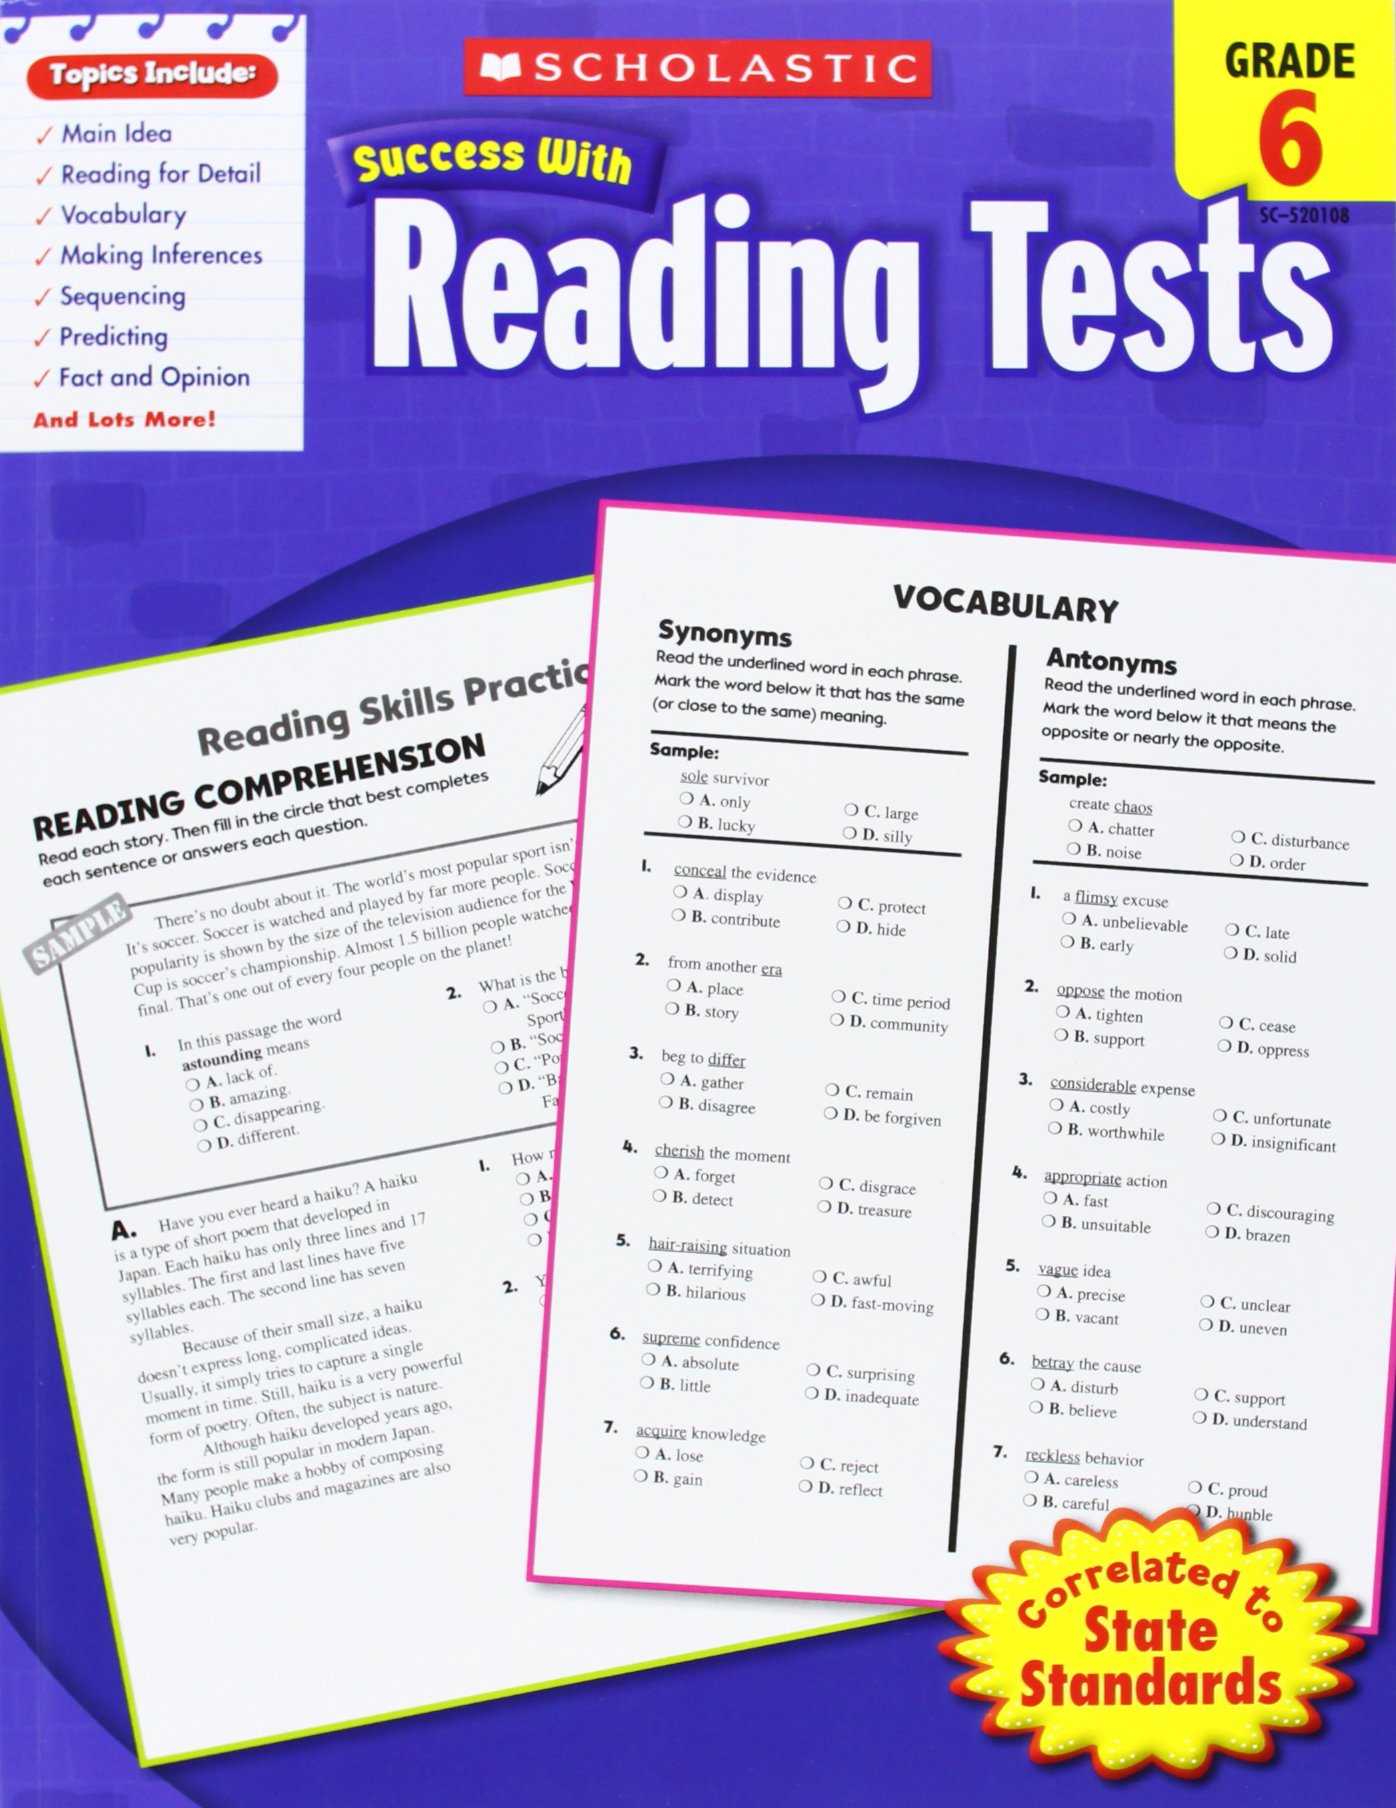 Skills Worksheet Directed Reading A Answer Key with Amazon Scholastic Success with Reading Tests Grade 6